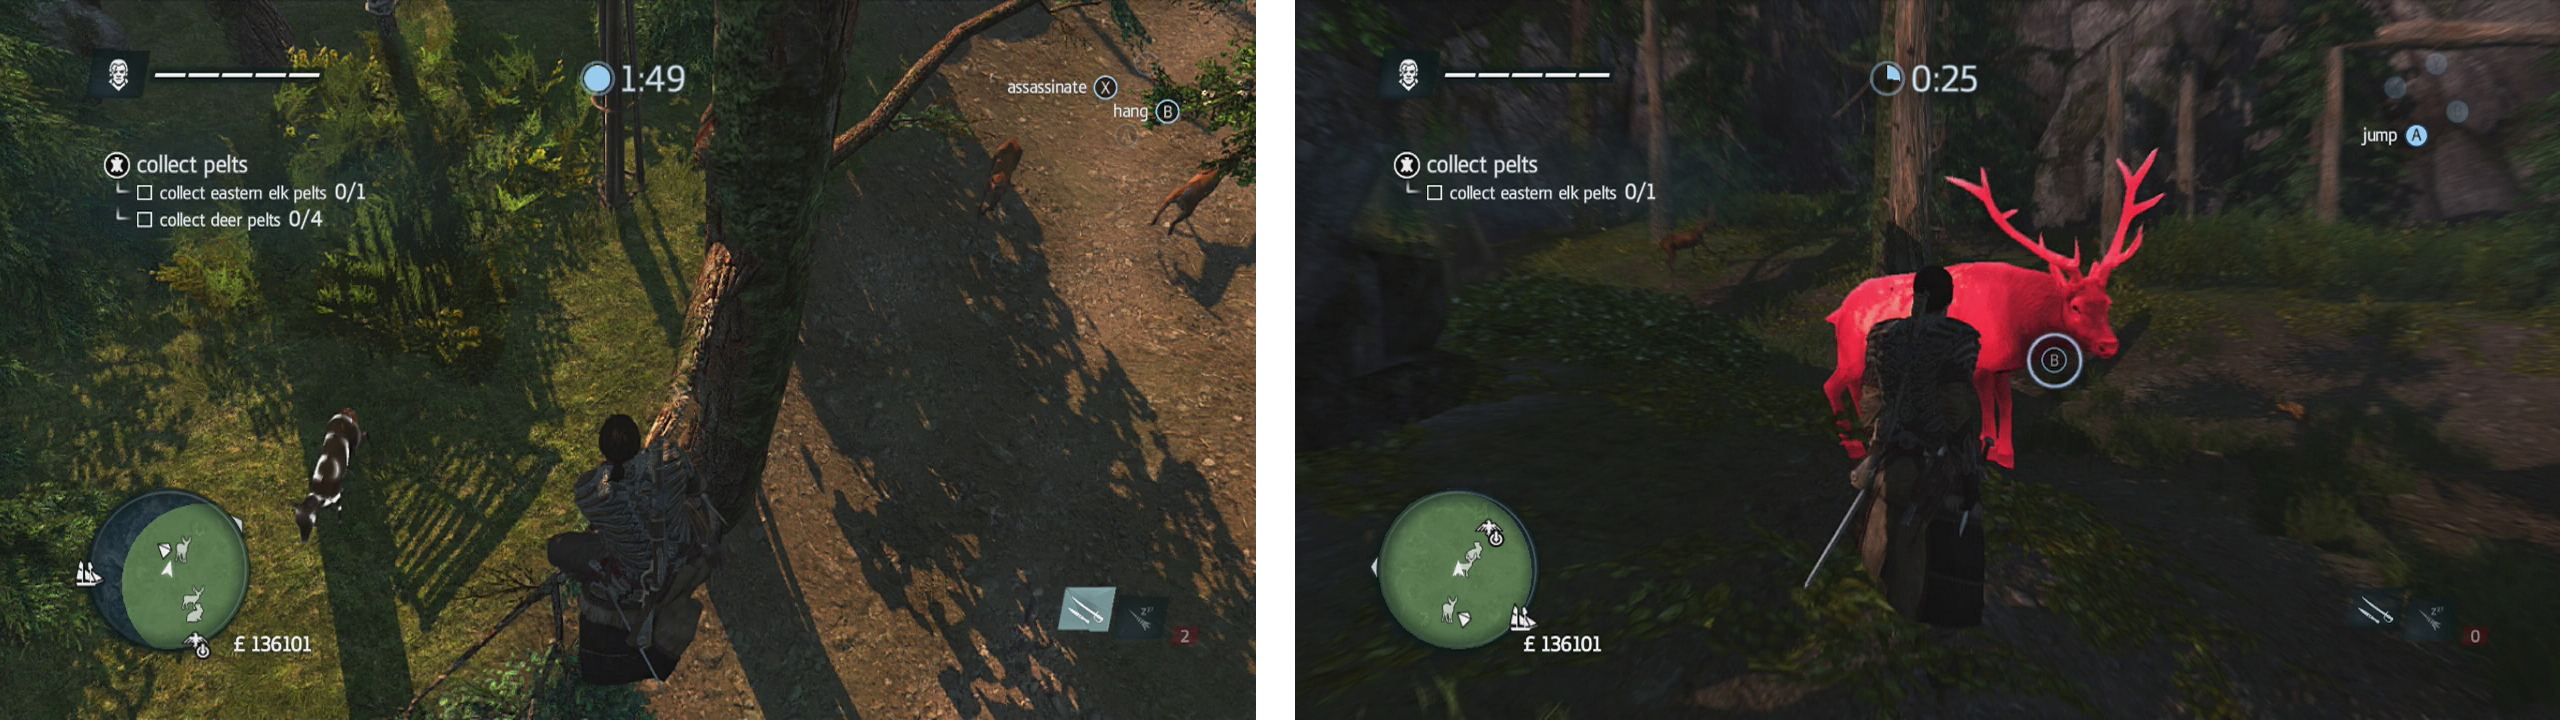 Use air assassinations or tranquilisers to take the deer down (left). Approach the elk to have it attack you, hit the button prompts to take it down (right).